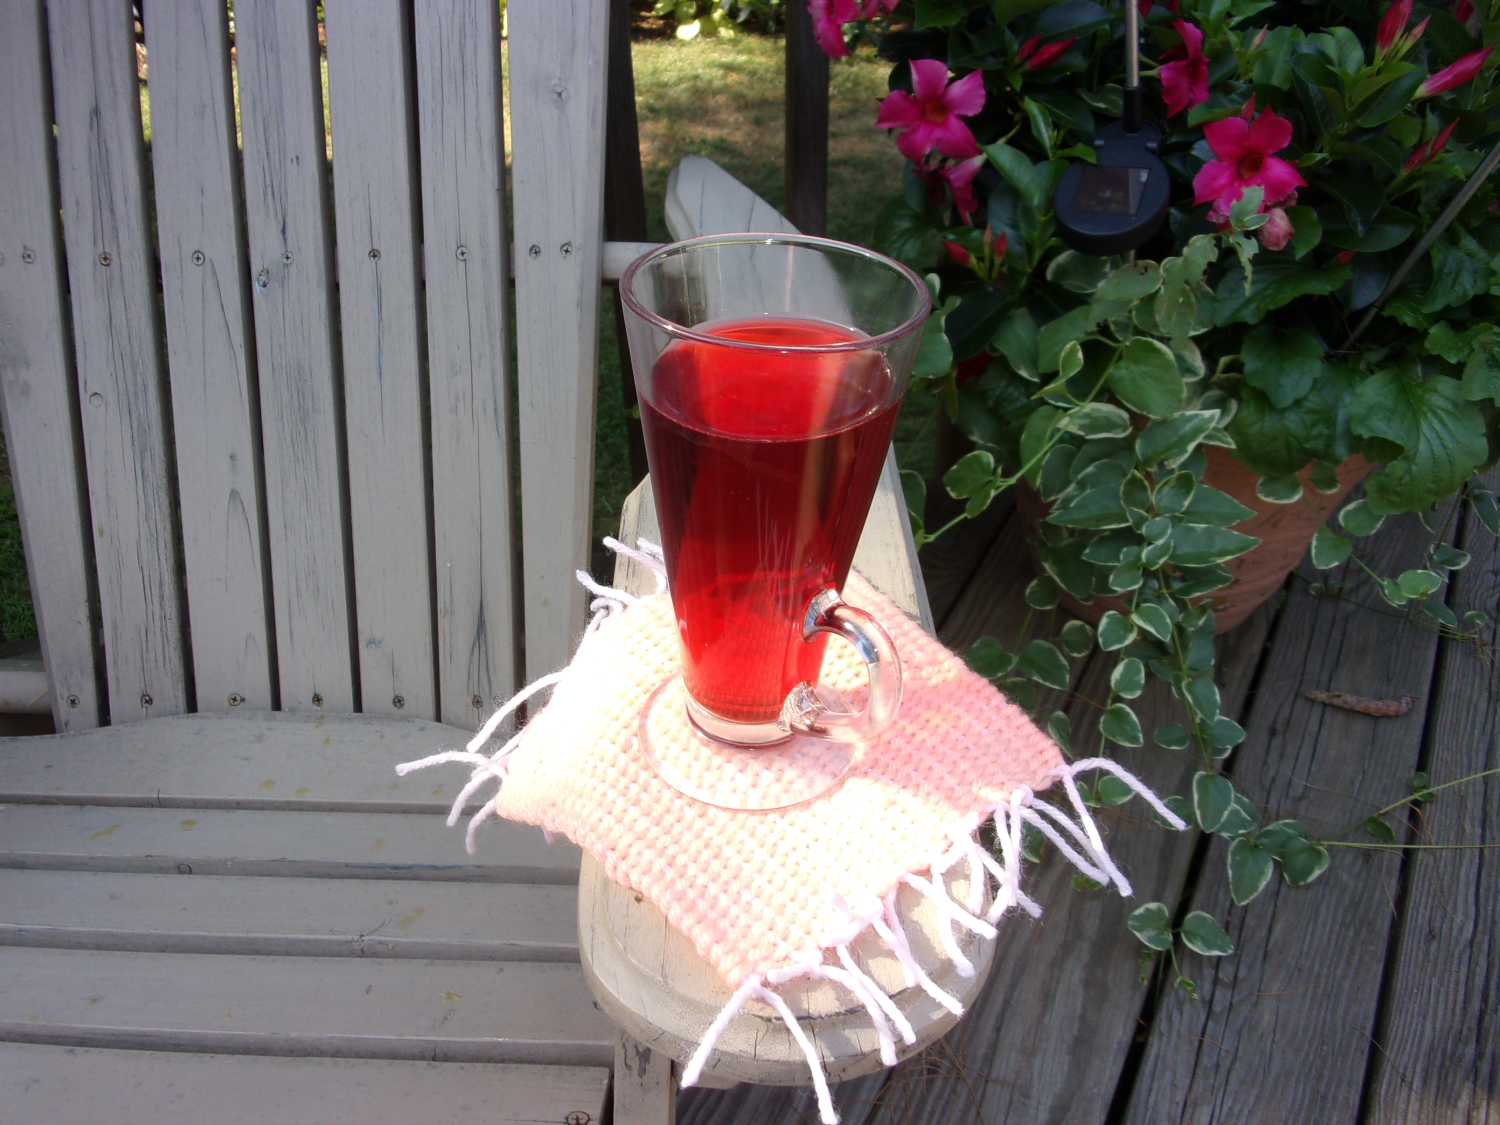 Enjoy your mug rug! This one is being enjoyed on a wooden patio with colorful flowers in the background, and a bright red drink in a glass is on the rug.